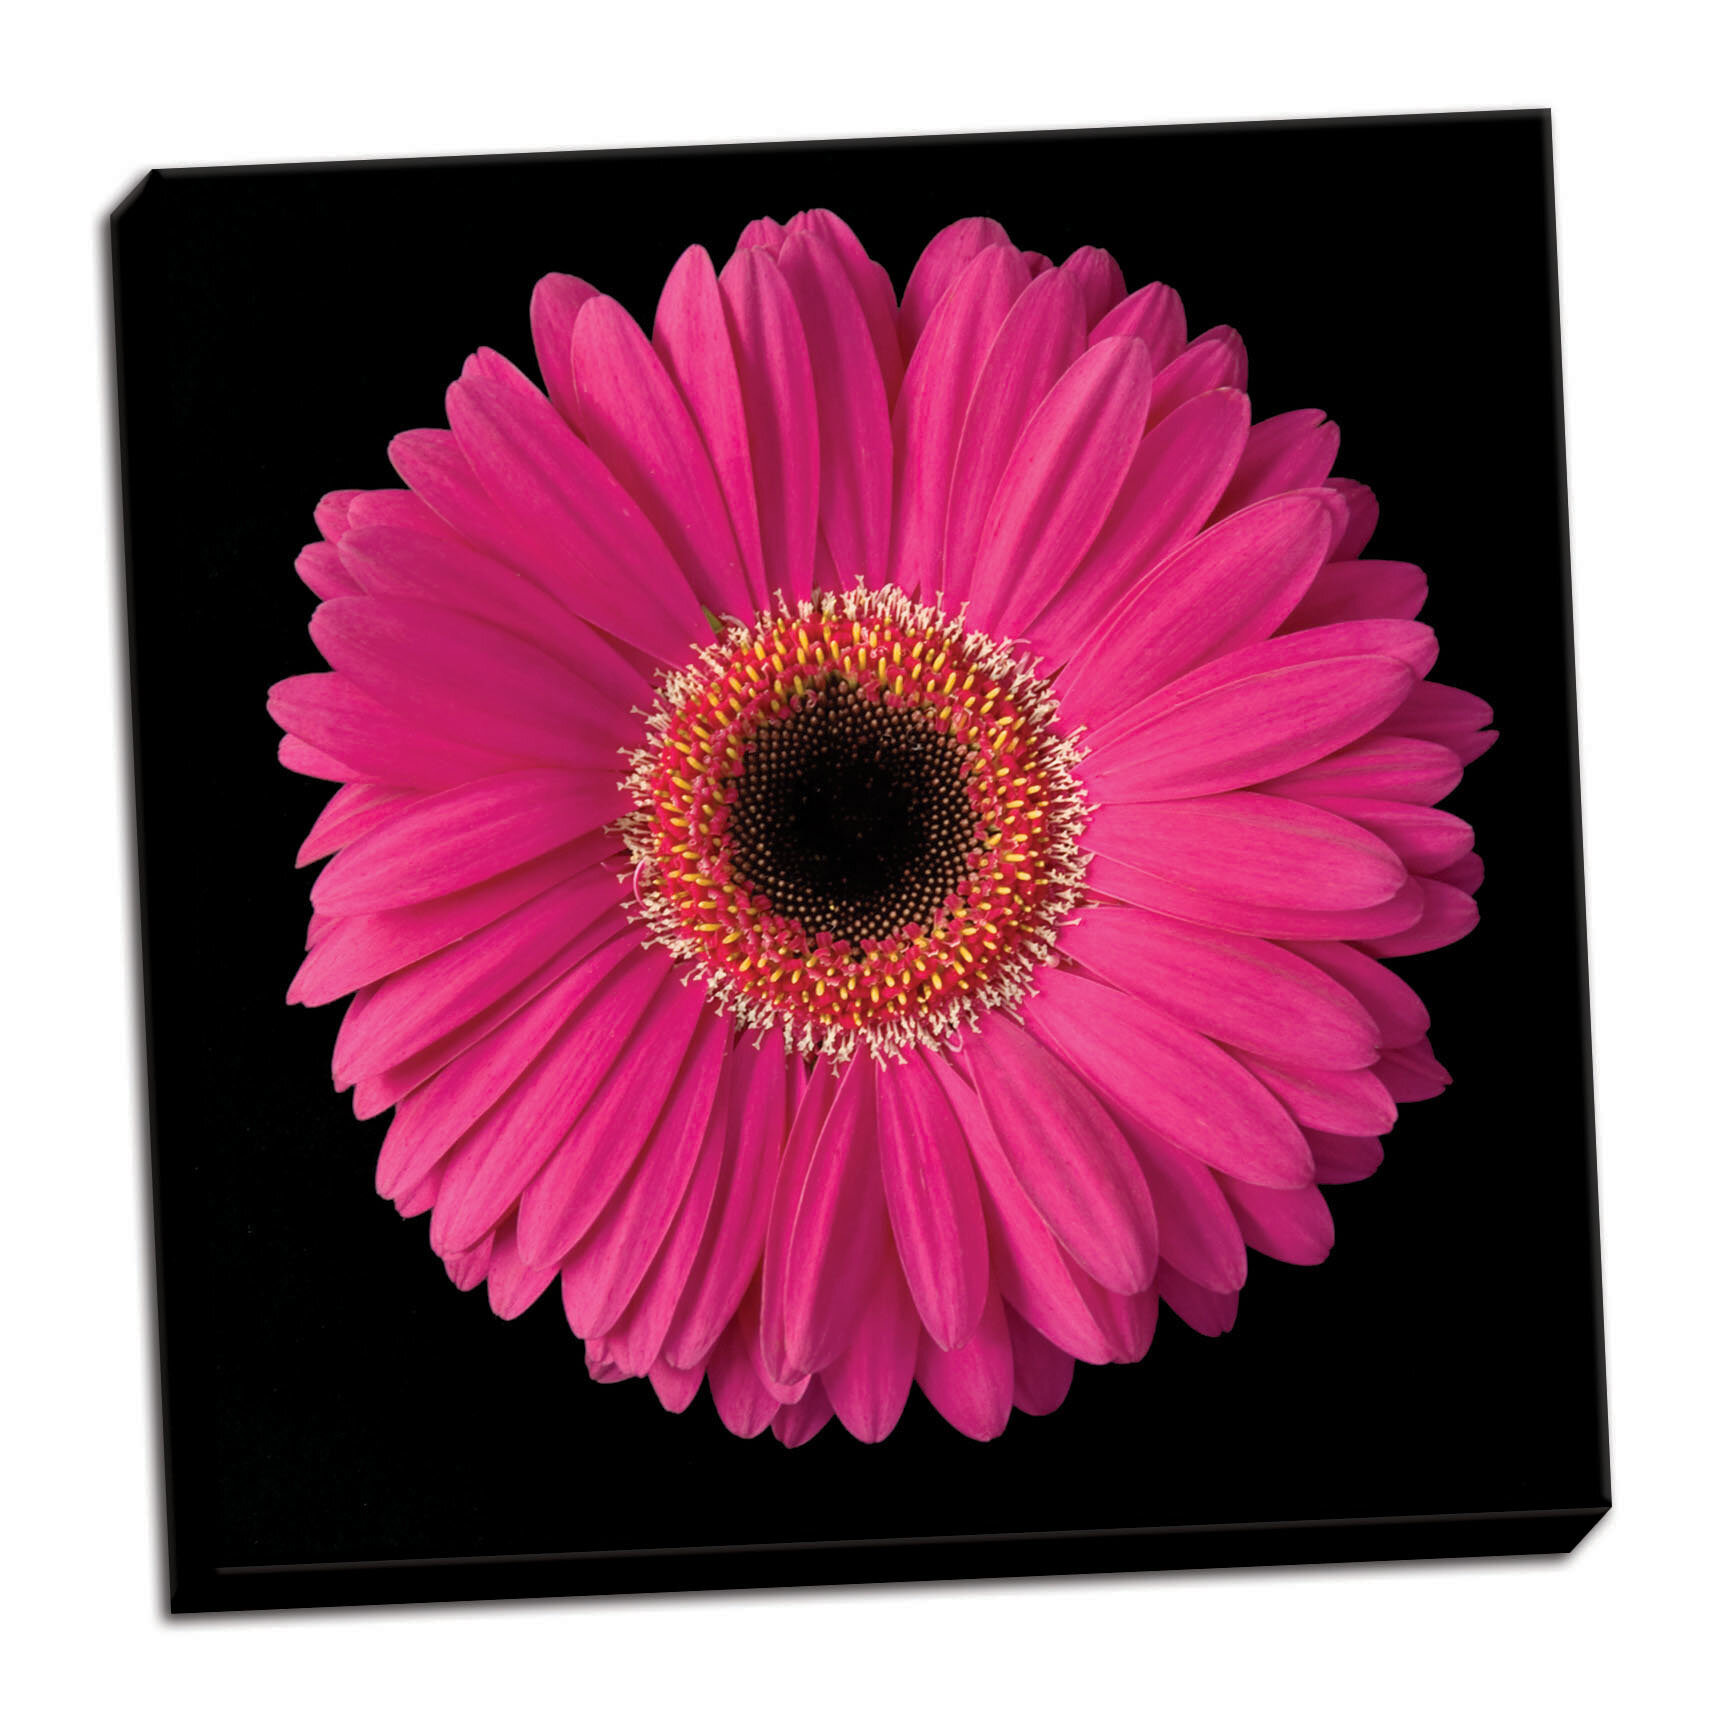 Ebern Designs Pink Gerbera Daisy Photographic Print On Wrapped Canvas Wayfair,Mornay Cheese Sauce